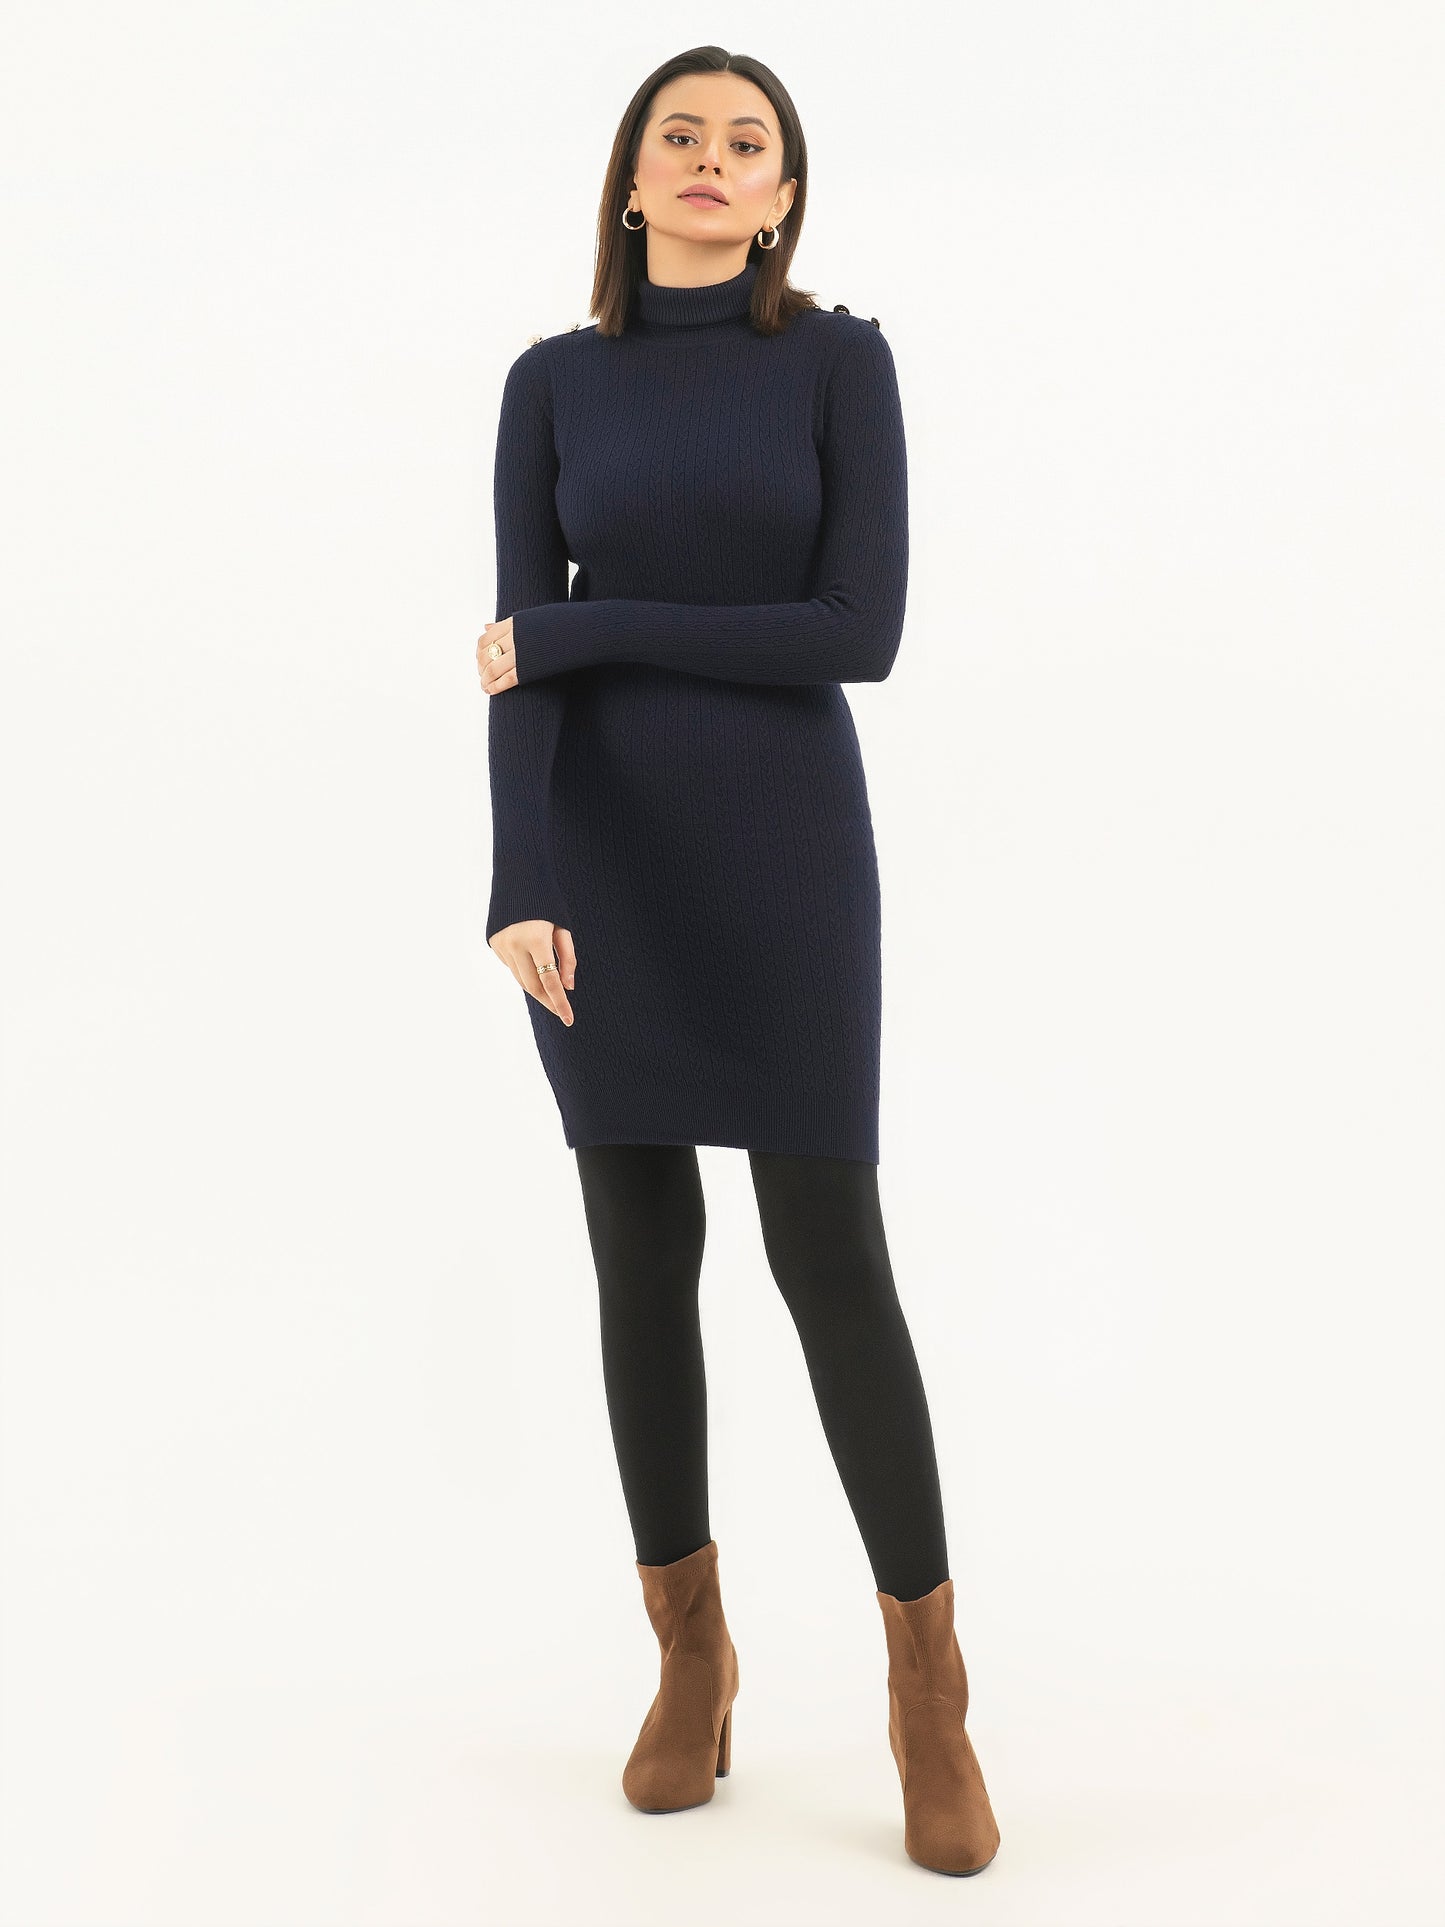 Buttoned Turtle Neck Dress